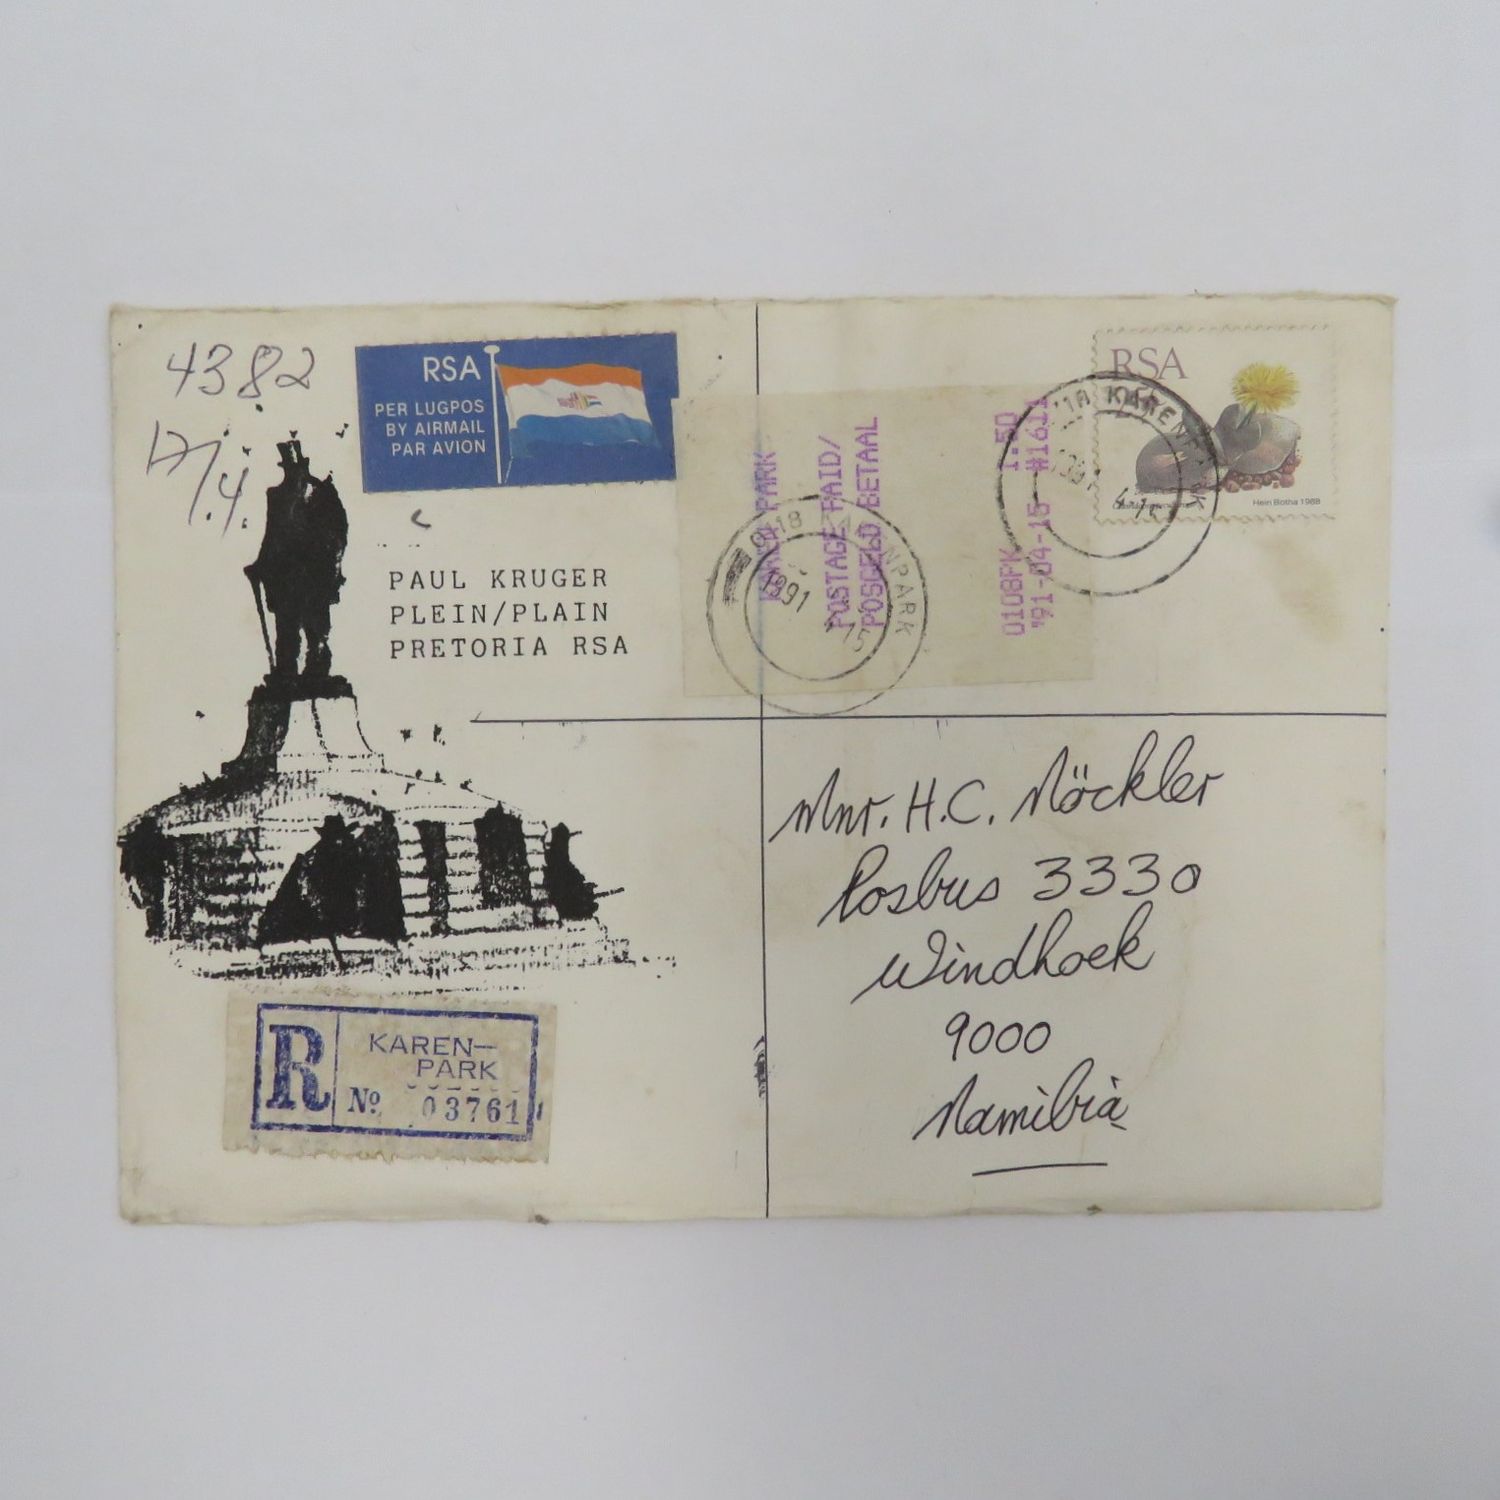 Registered letter airmail from Karenpark, South Africa to Windhoek, Namibia on Paul Kruger Plein stationery with franking label. And 8 stamps on back and one on front -all cancelled -receiving stamp 1